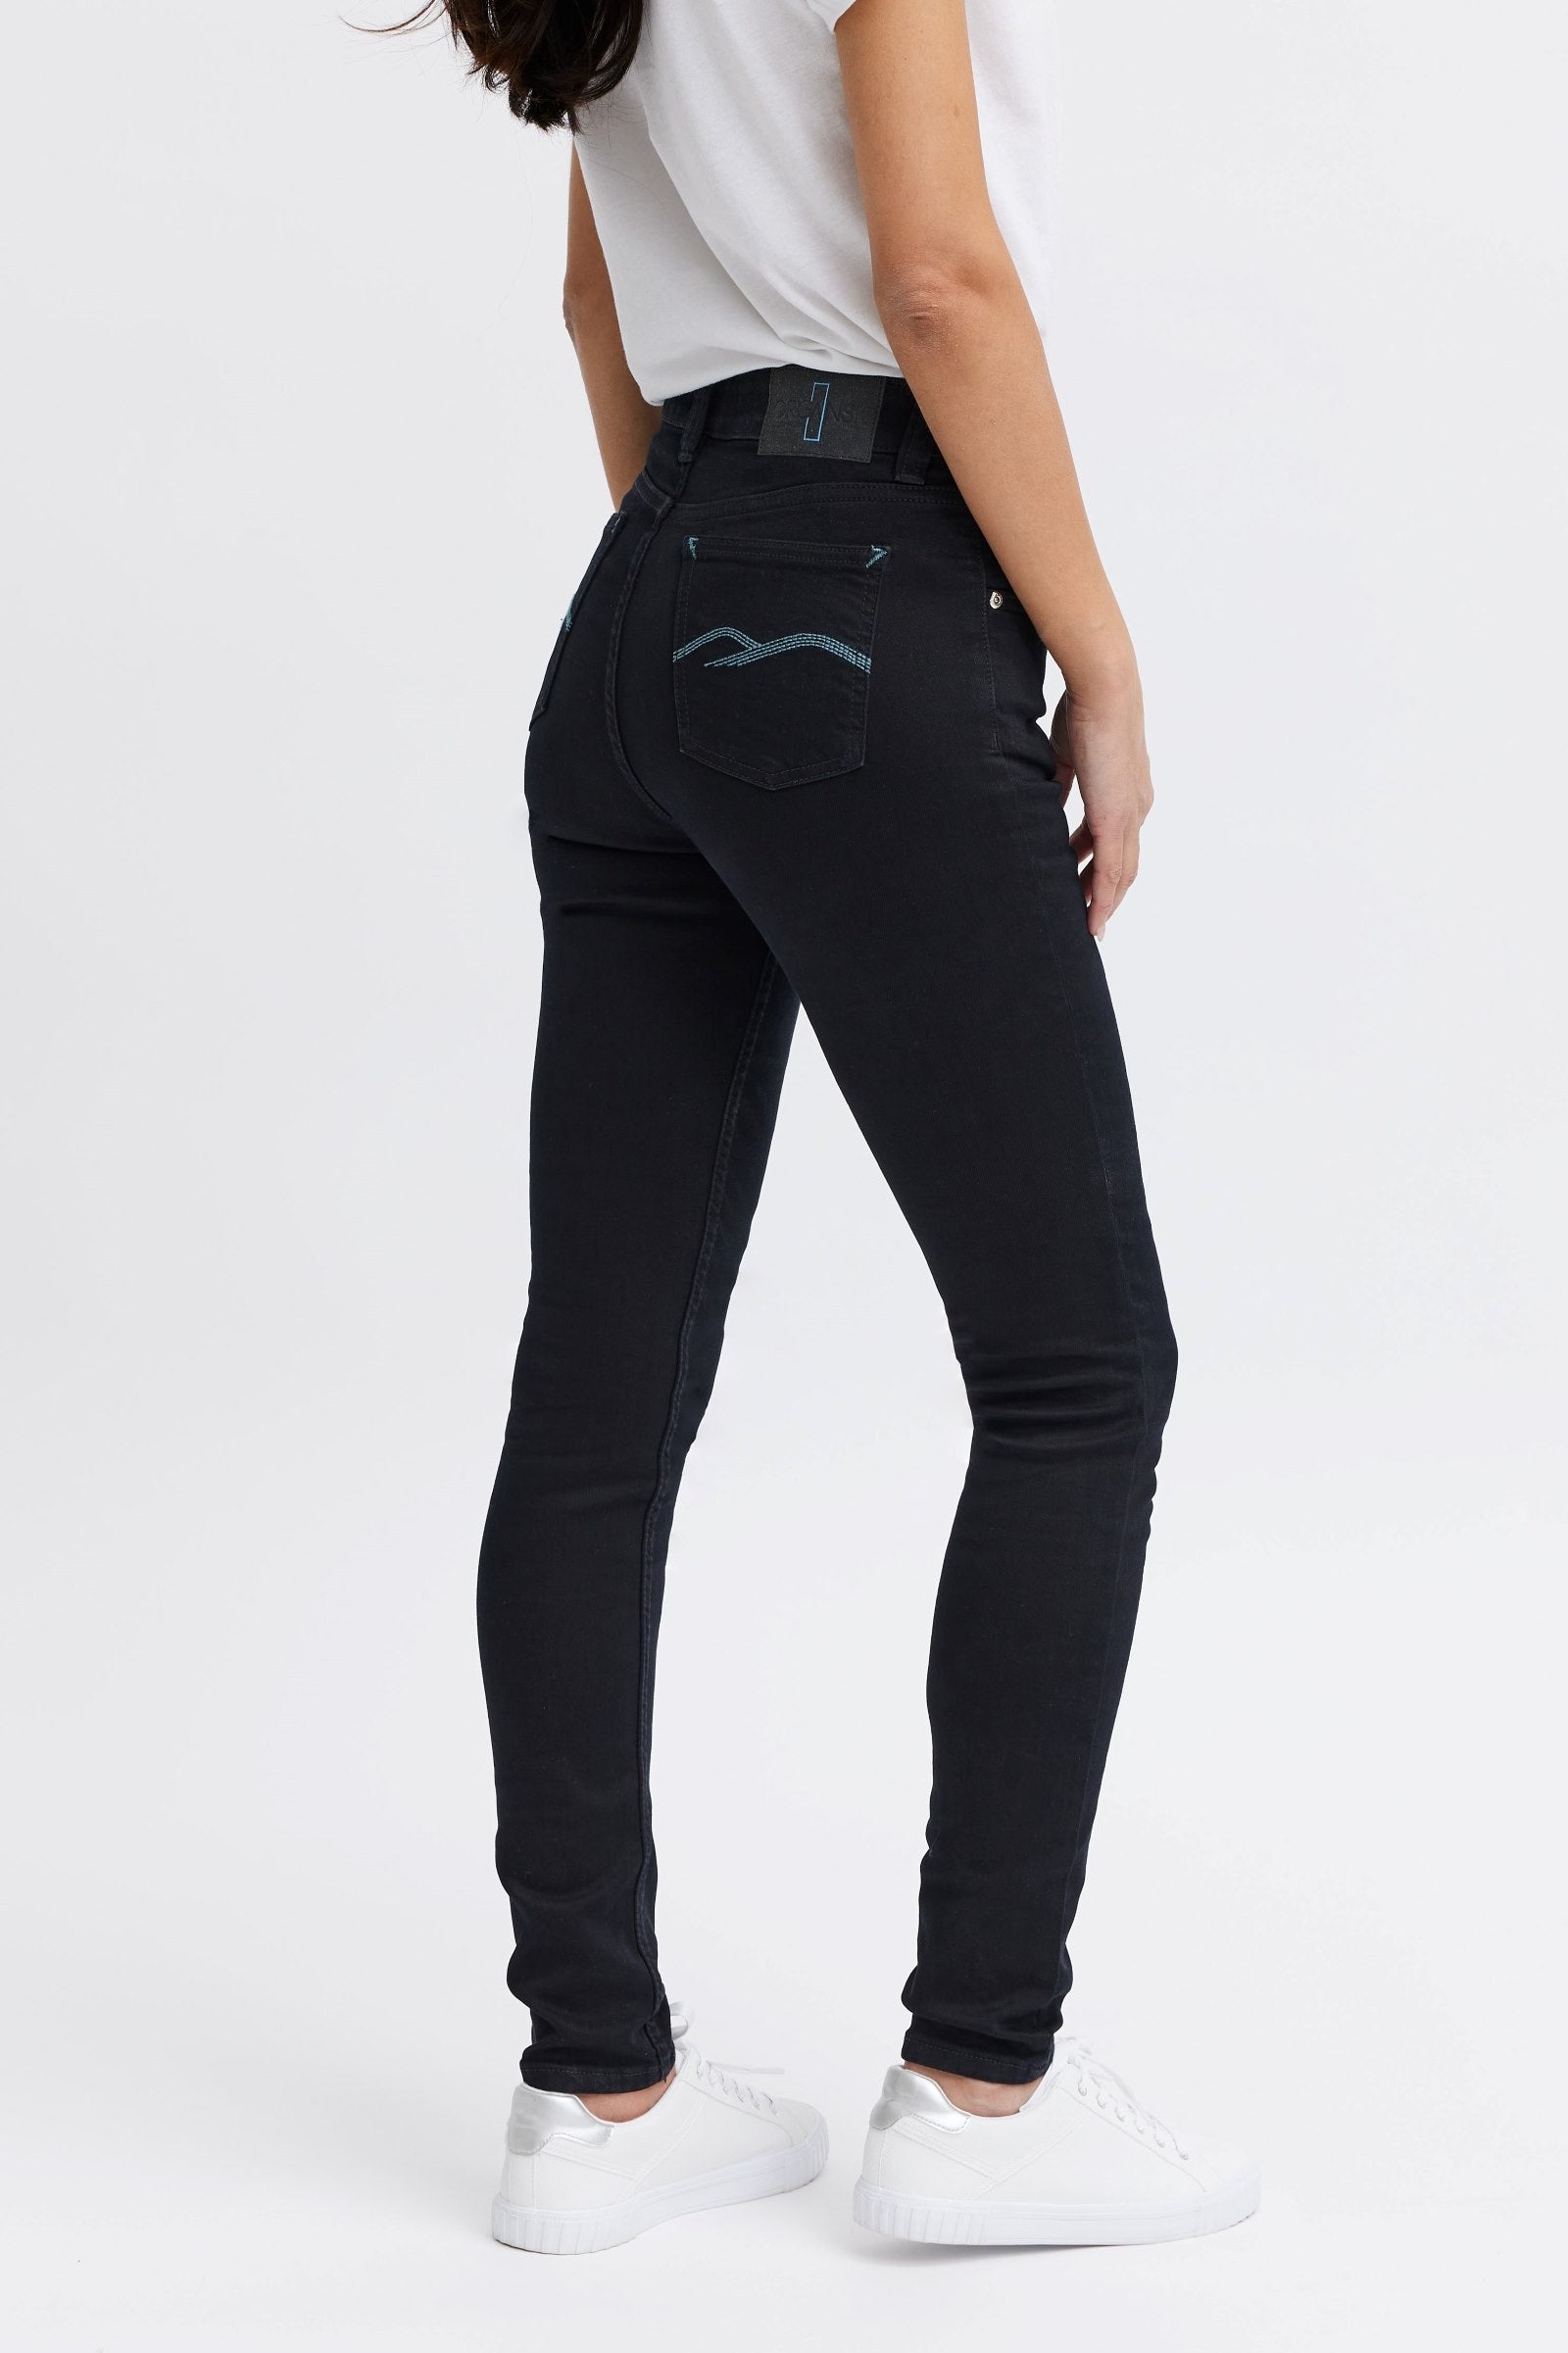 Skinny Fit Jeans | Mid rise to High waisted Slim fits | Women’s Denim ...